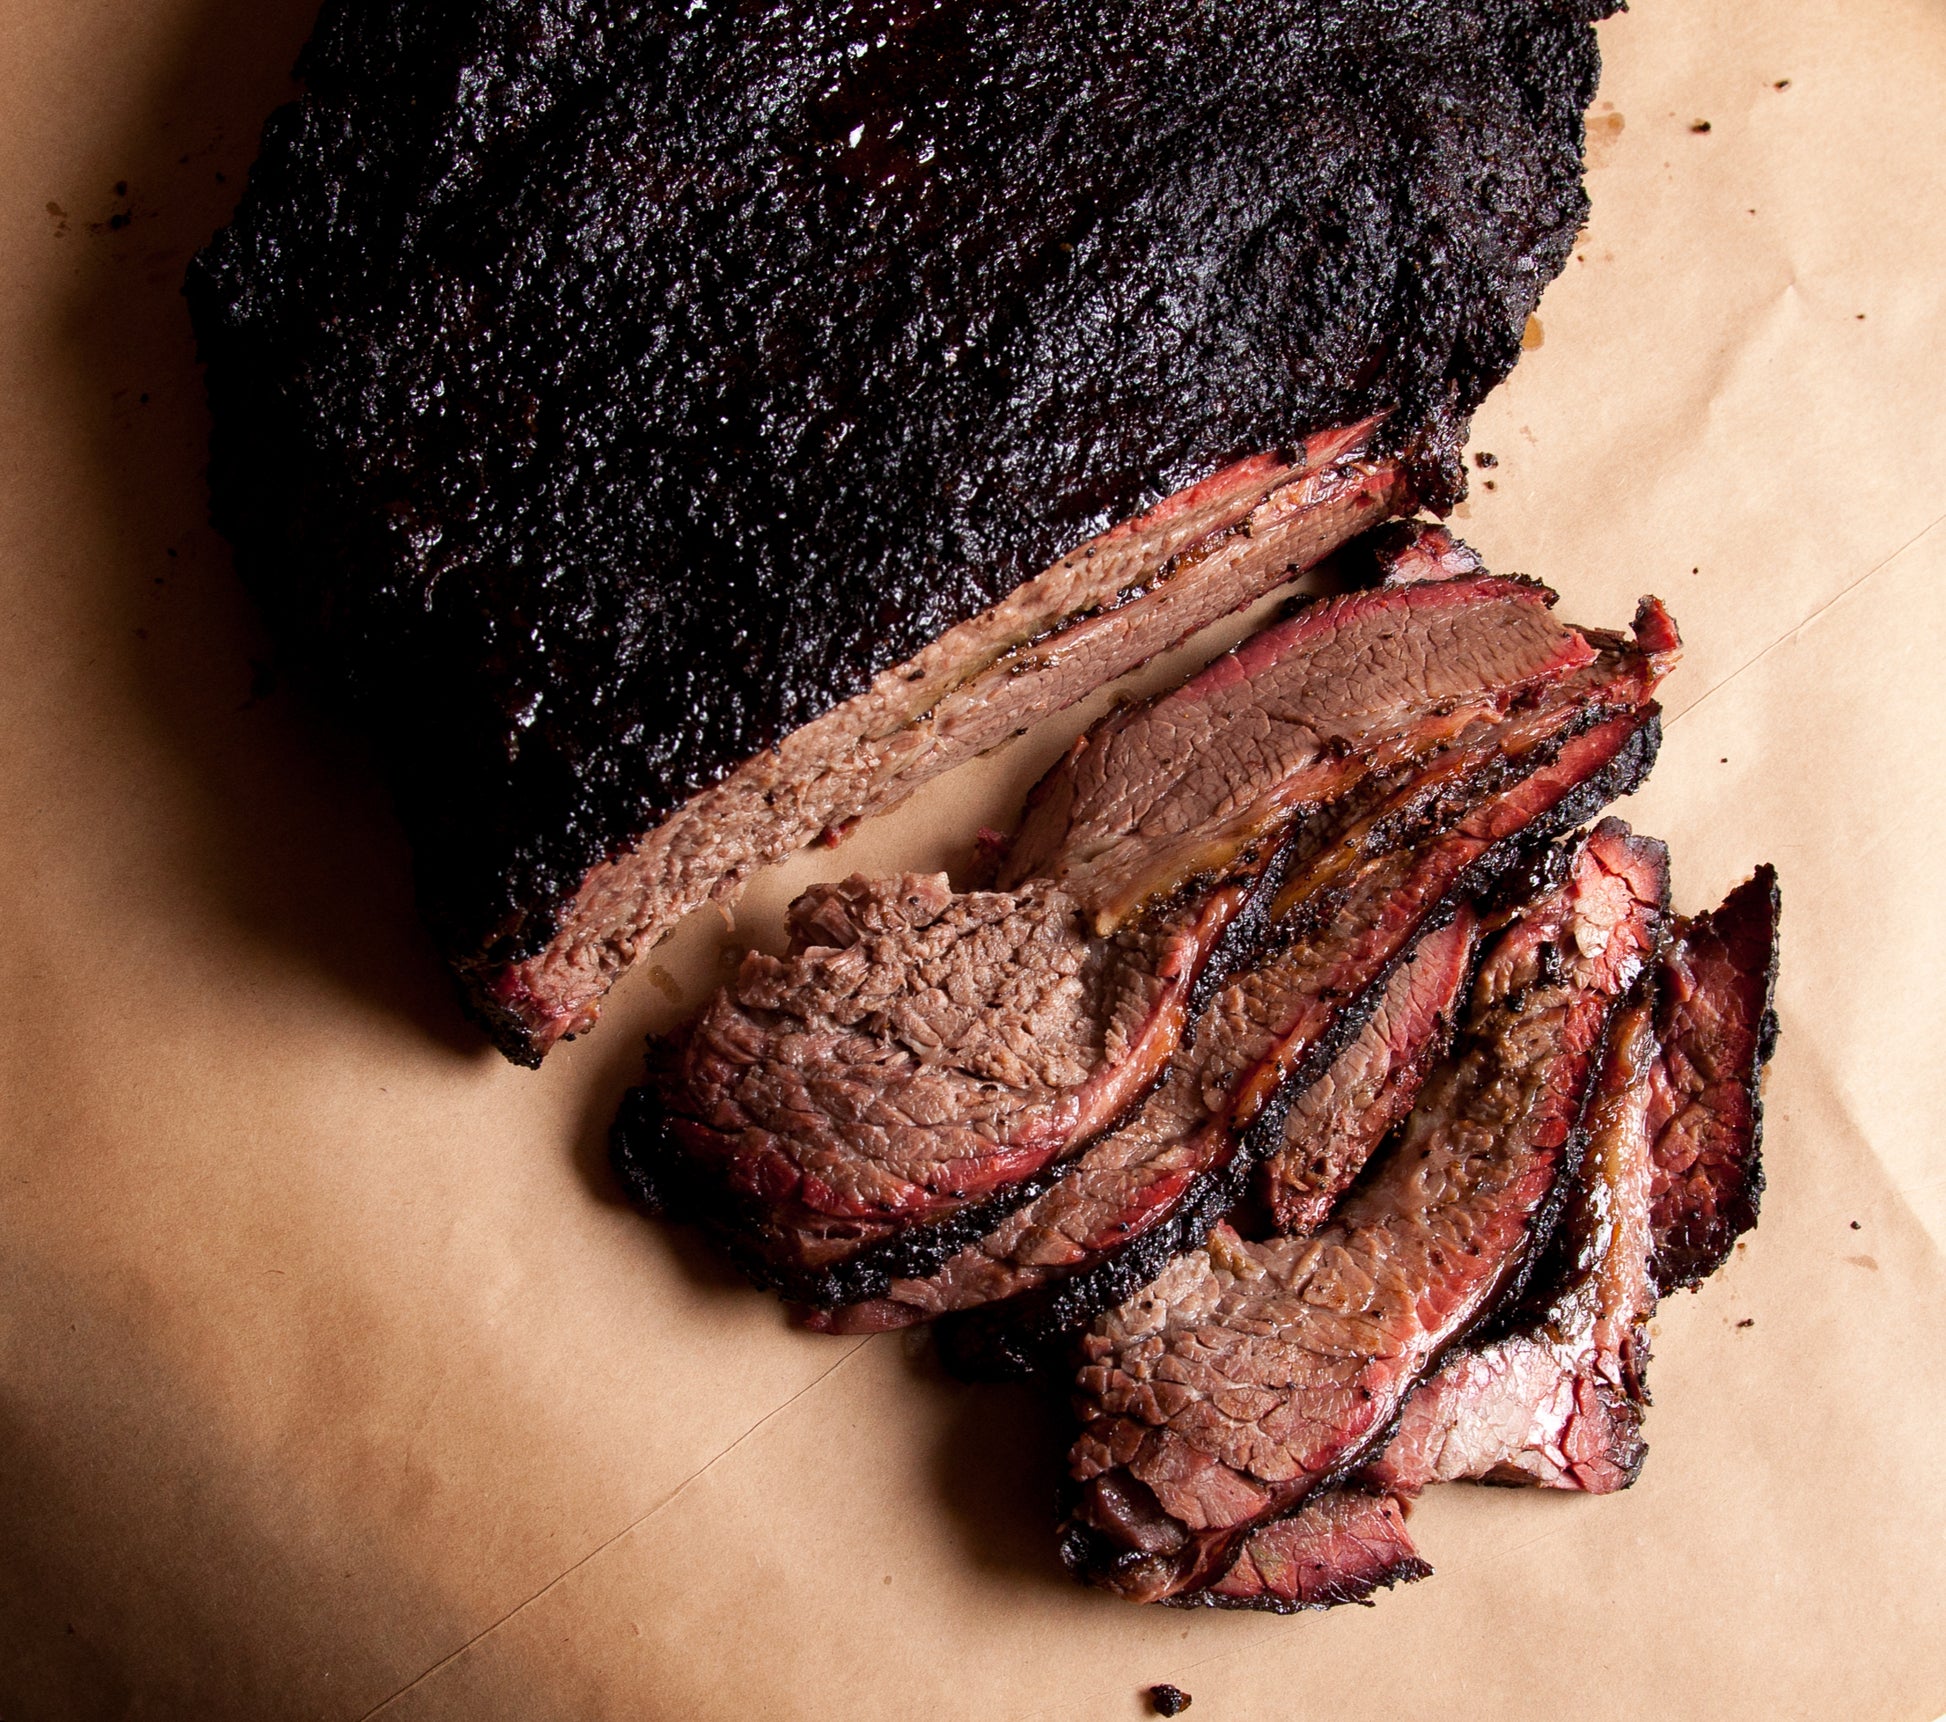 How Much Brisket Per Person? Calculator Tool Included